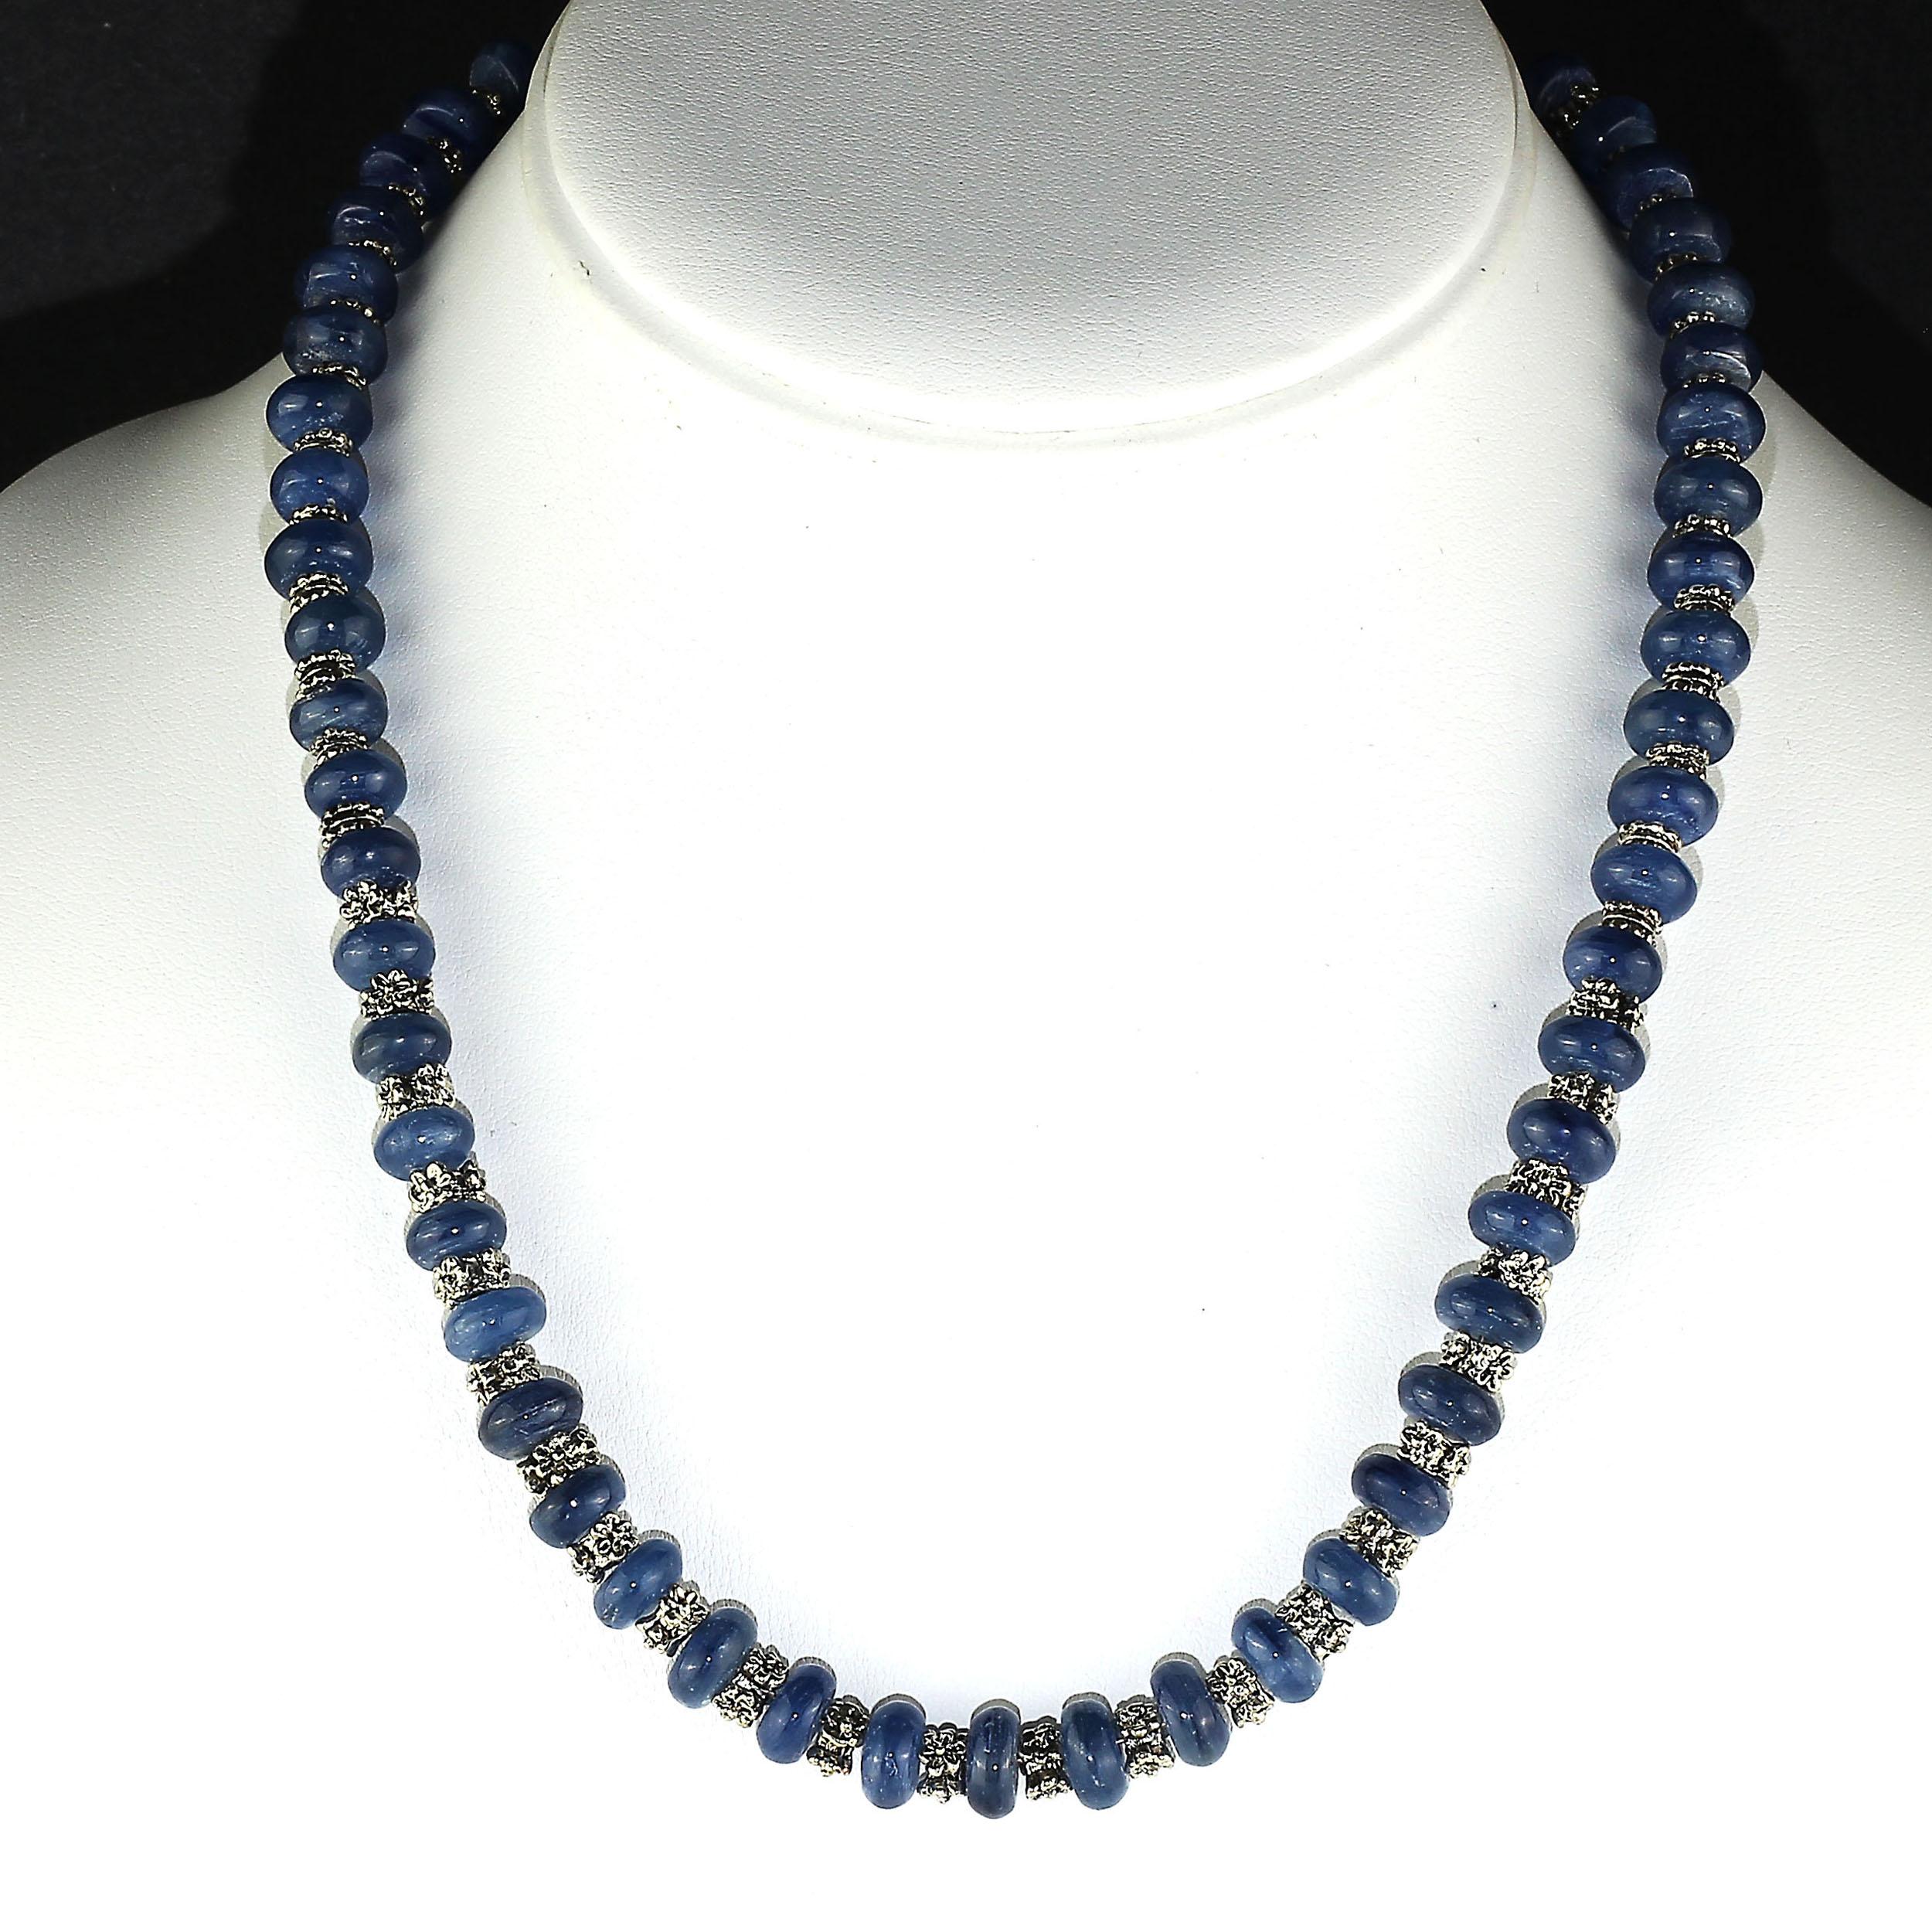 Necklace of Glistening Blue Kyanite rondelles, 9-10 MM, alternating with ornate silver Bali beads and finished with a Sterling Silver Celtic hook and eye. This unique 19 inch necklace is created in one of our most favorite colors and gemstones,